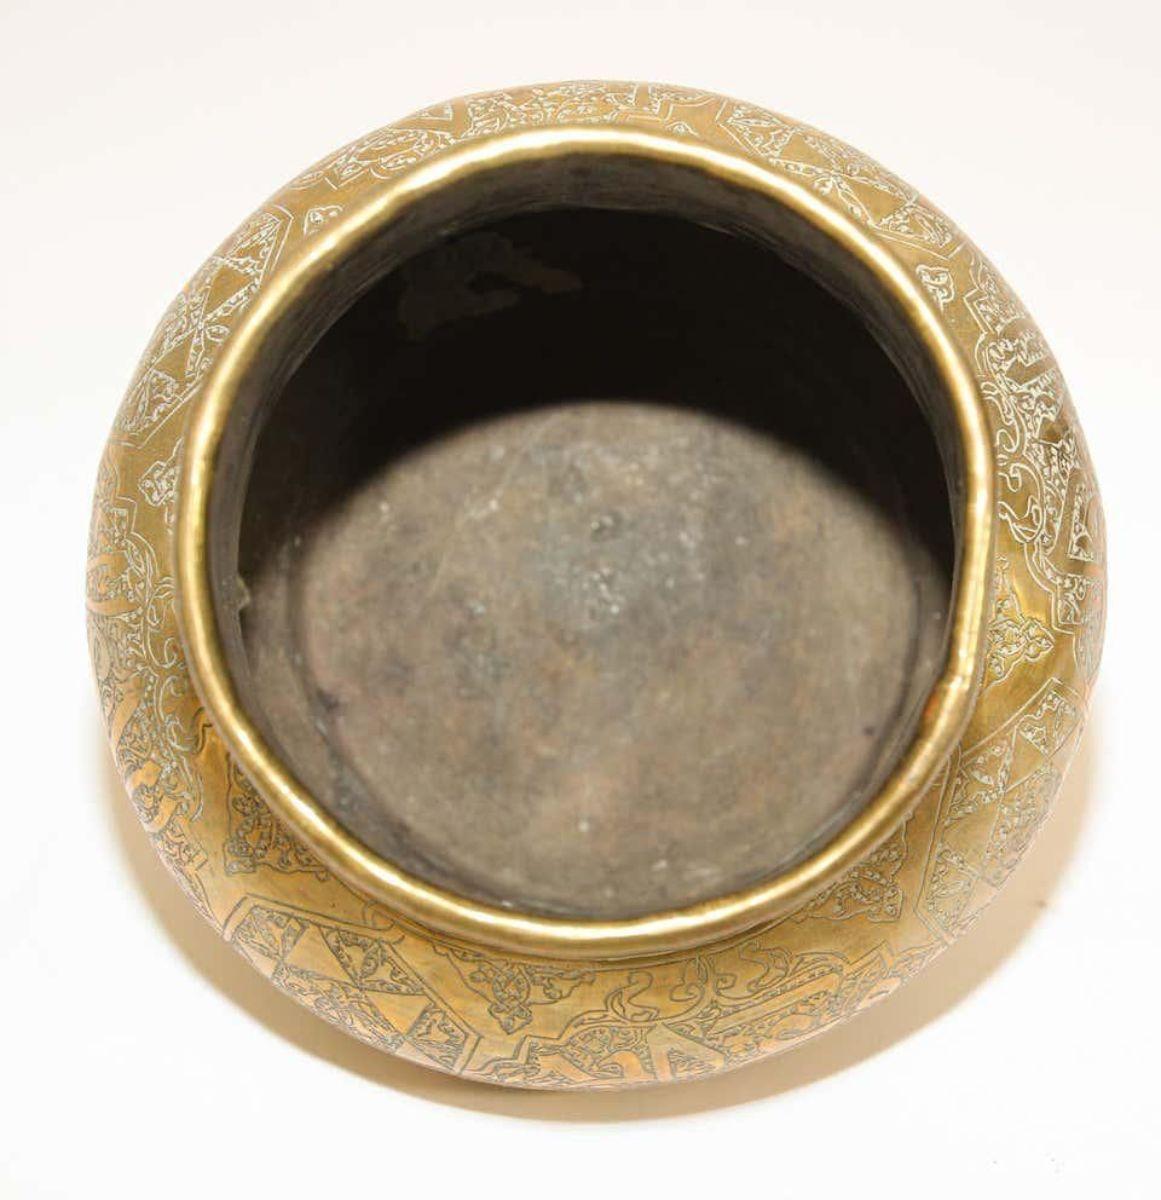 Hammered Antique Moorish Islamic Brass Bowl with Calligraphy Writing For Sale